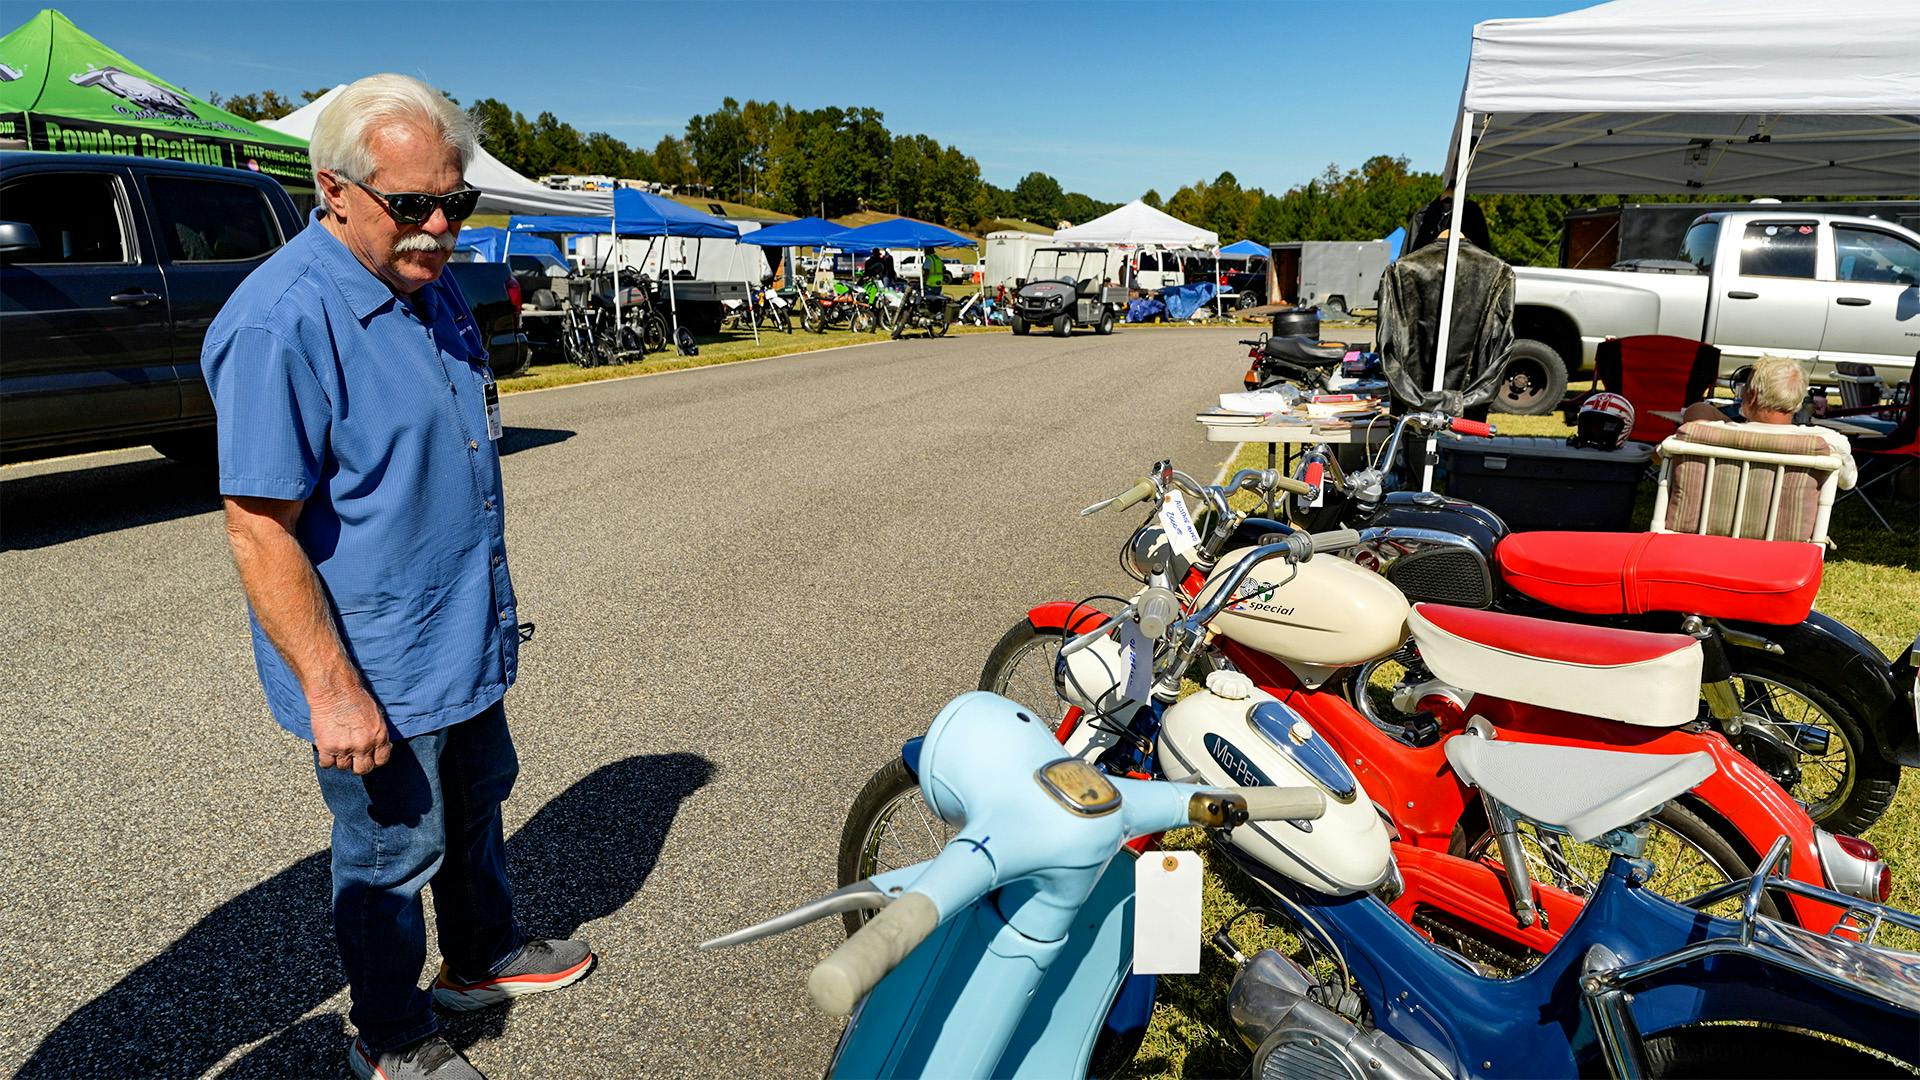 Where’d You Find That? | Barber Vintage Motorcycle Festival Seminar